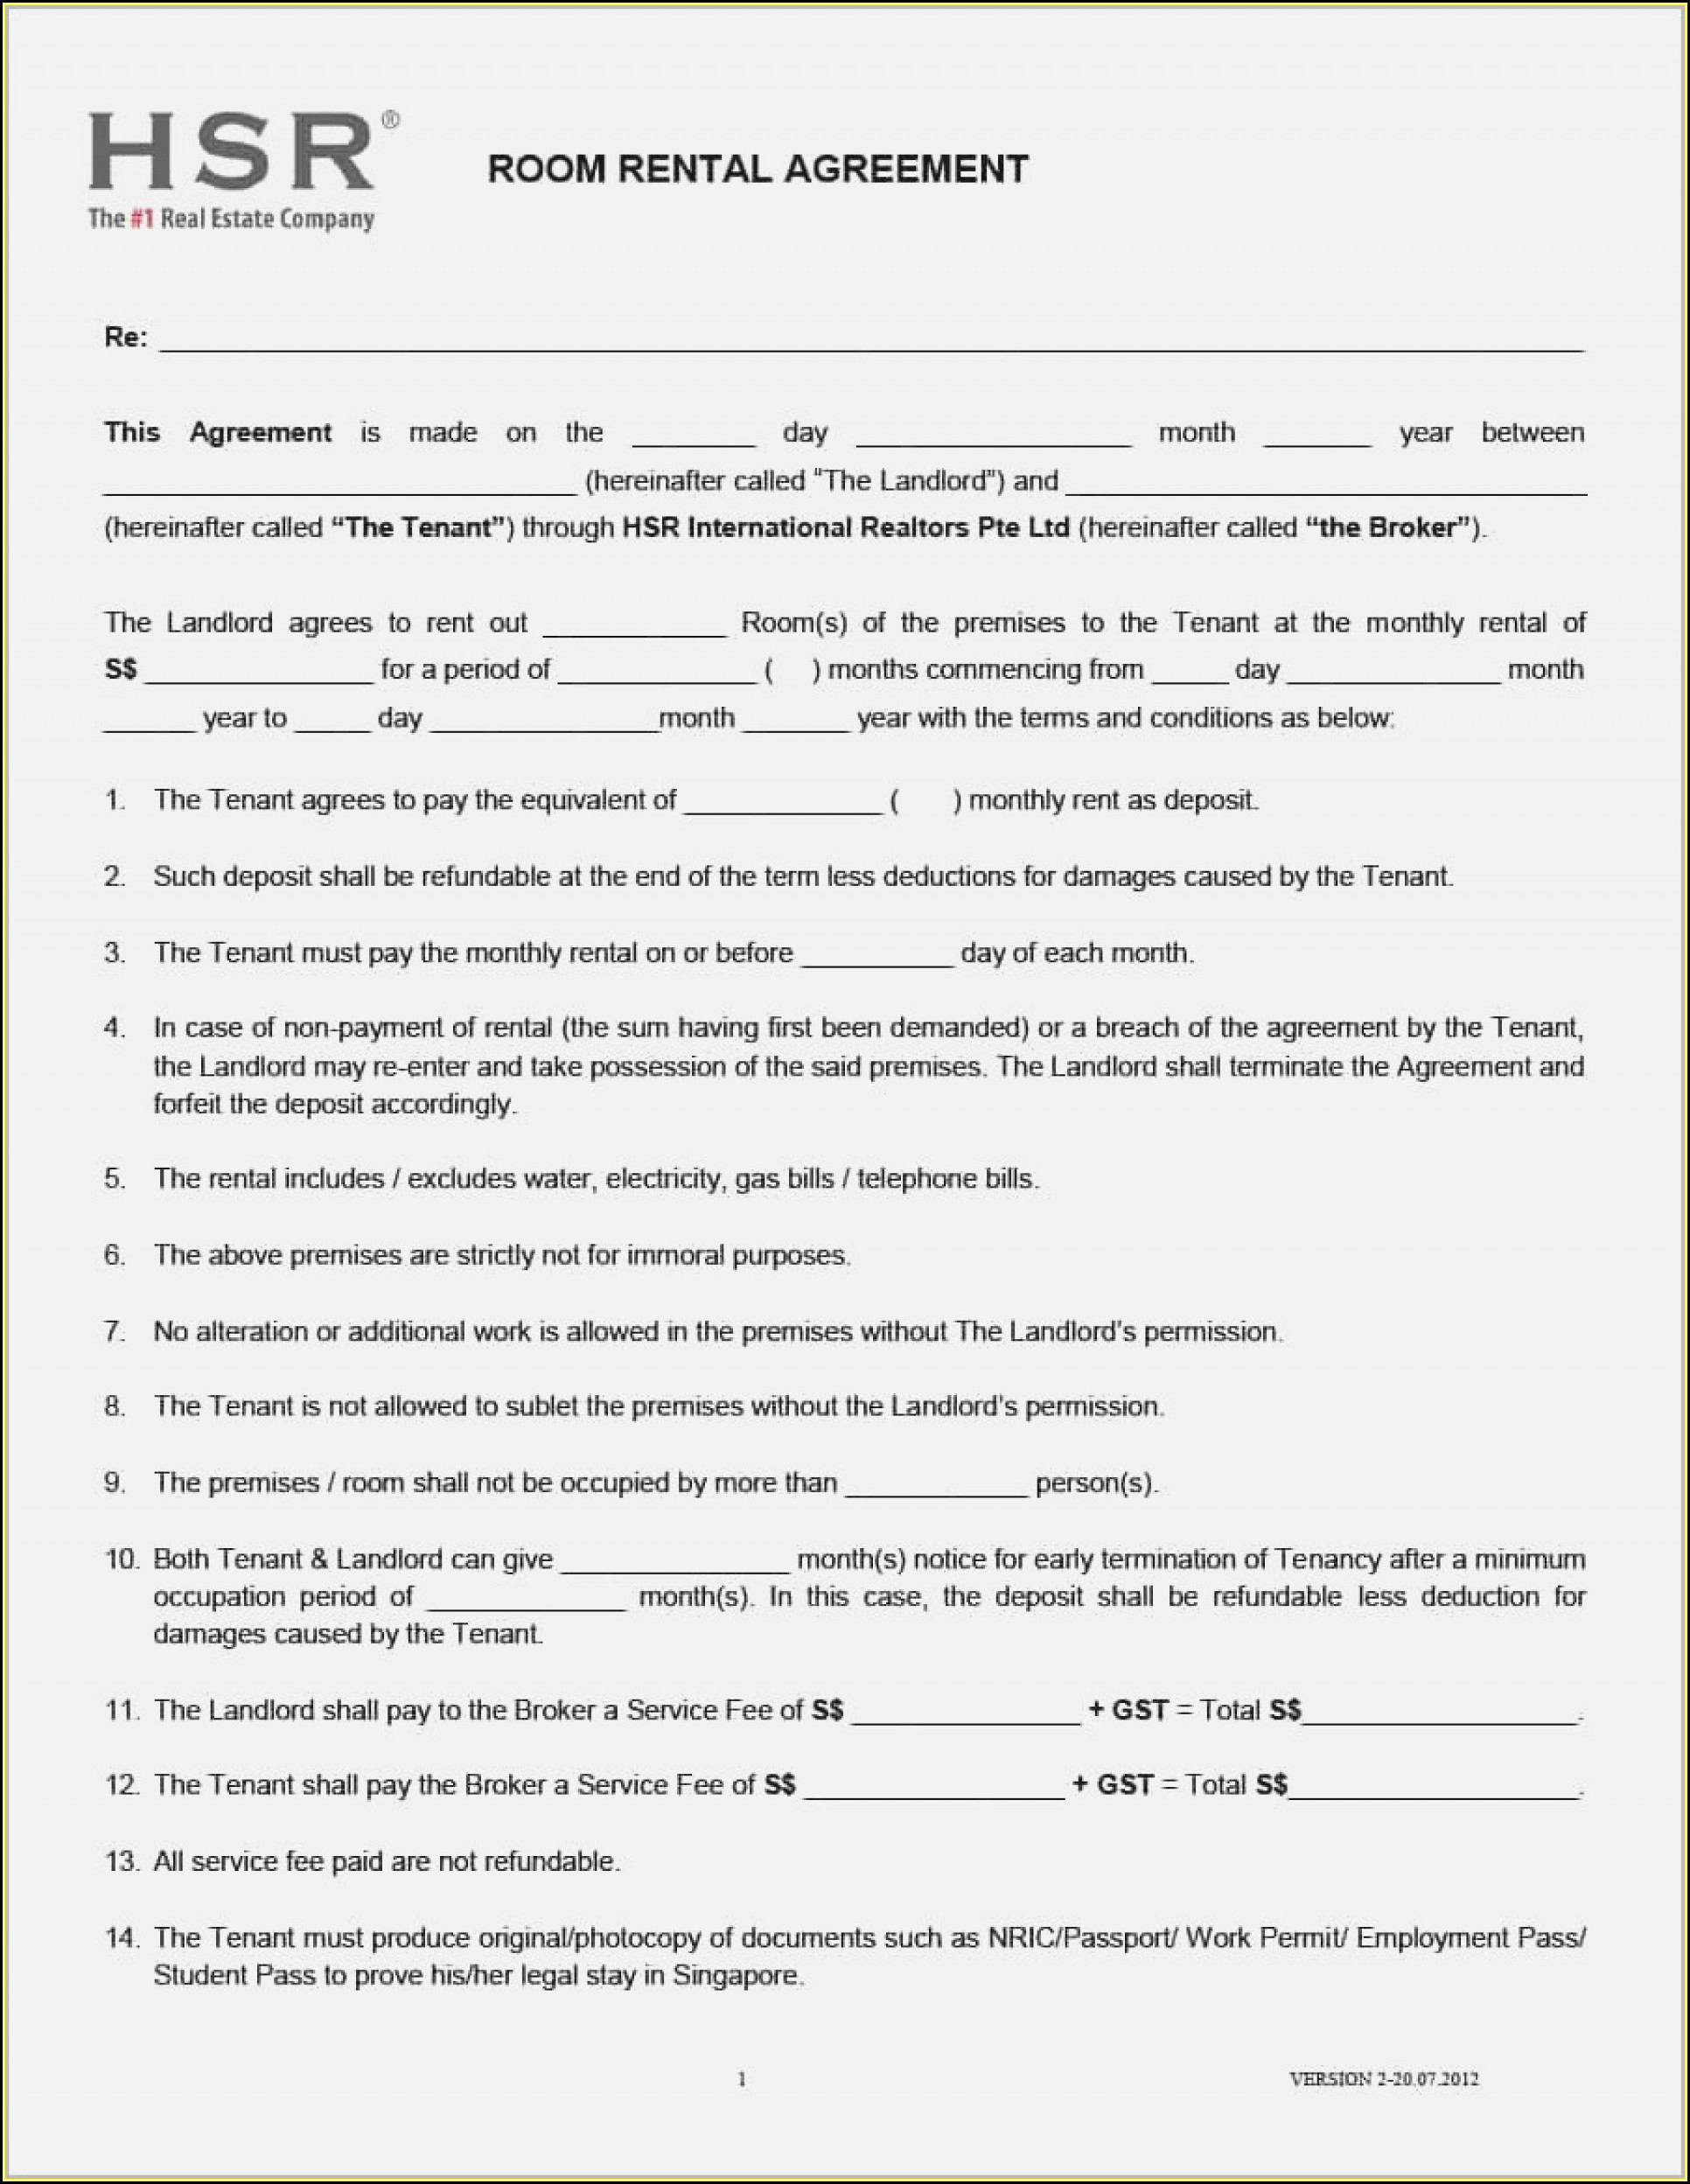 Car Parking Lease Agreement Template